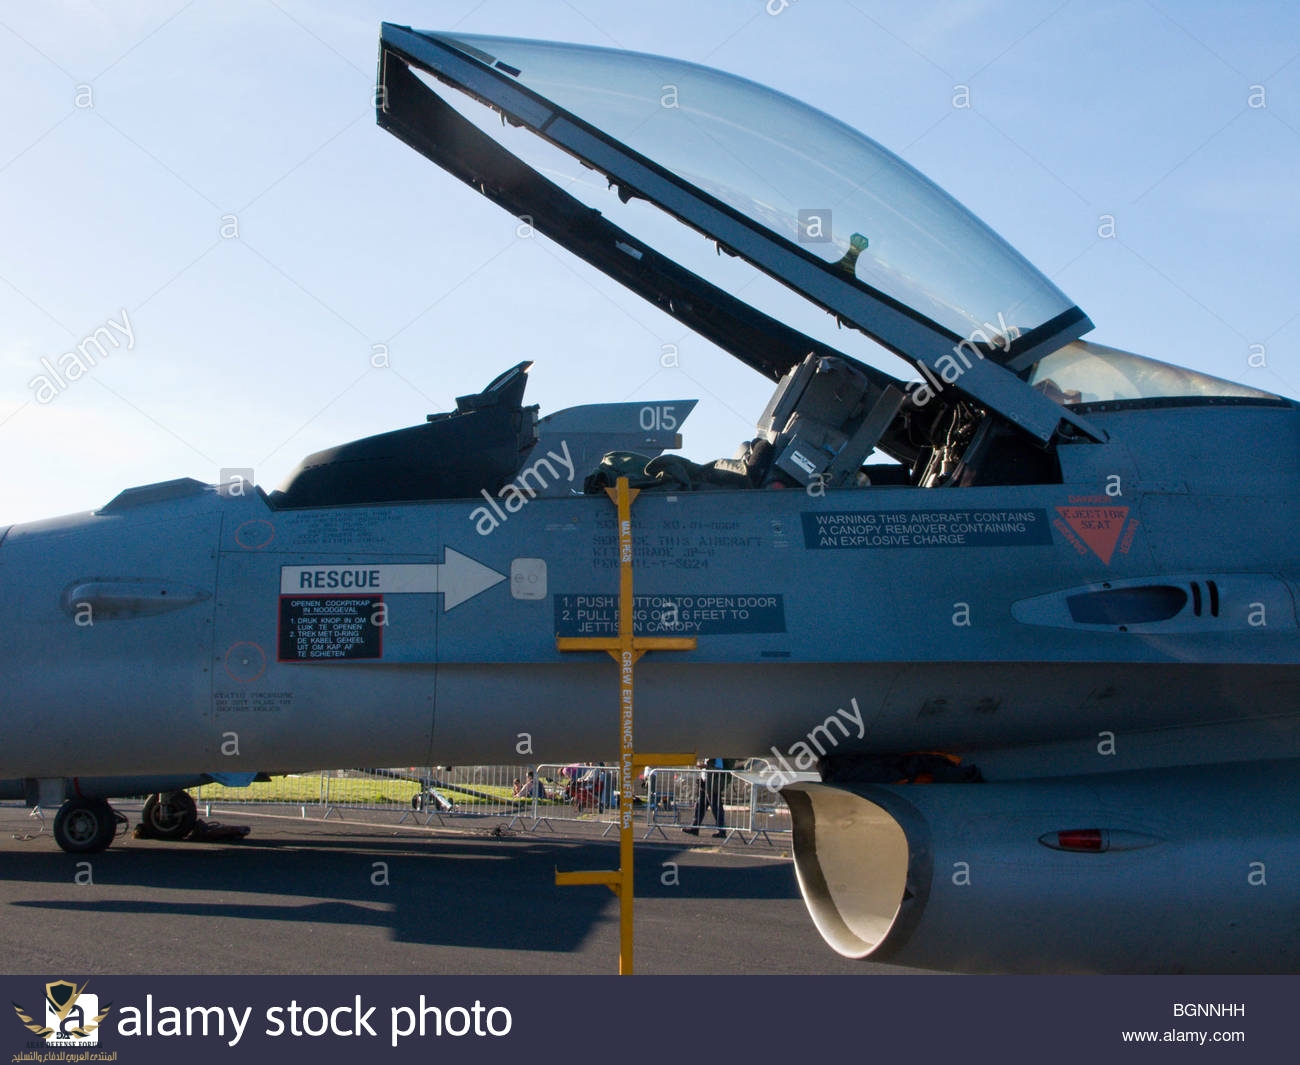 ladder-and-canopy-of-f16am-jet-fighter-at-raf-leuchars-airshow-2009-BGNNHH.jpg